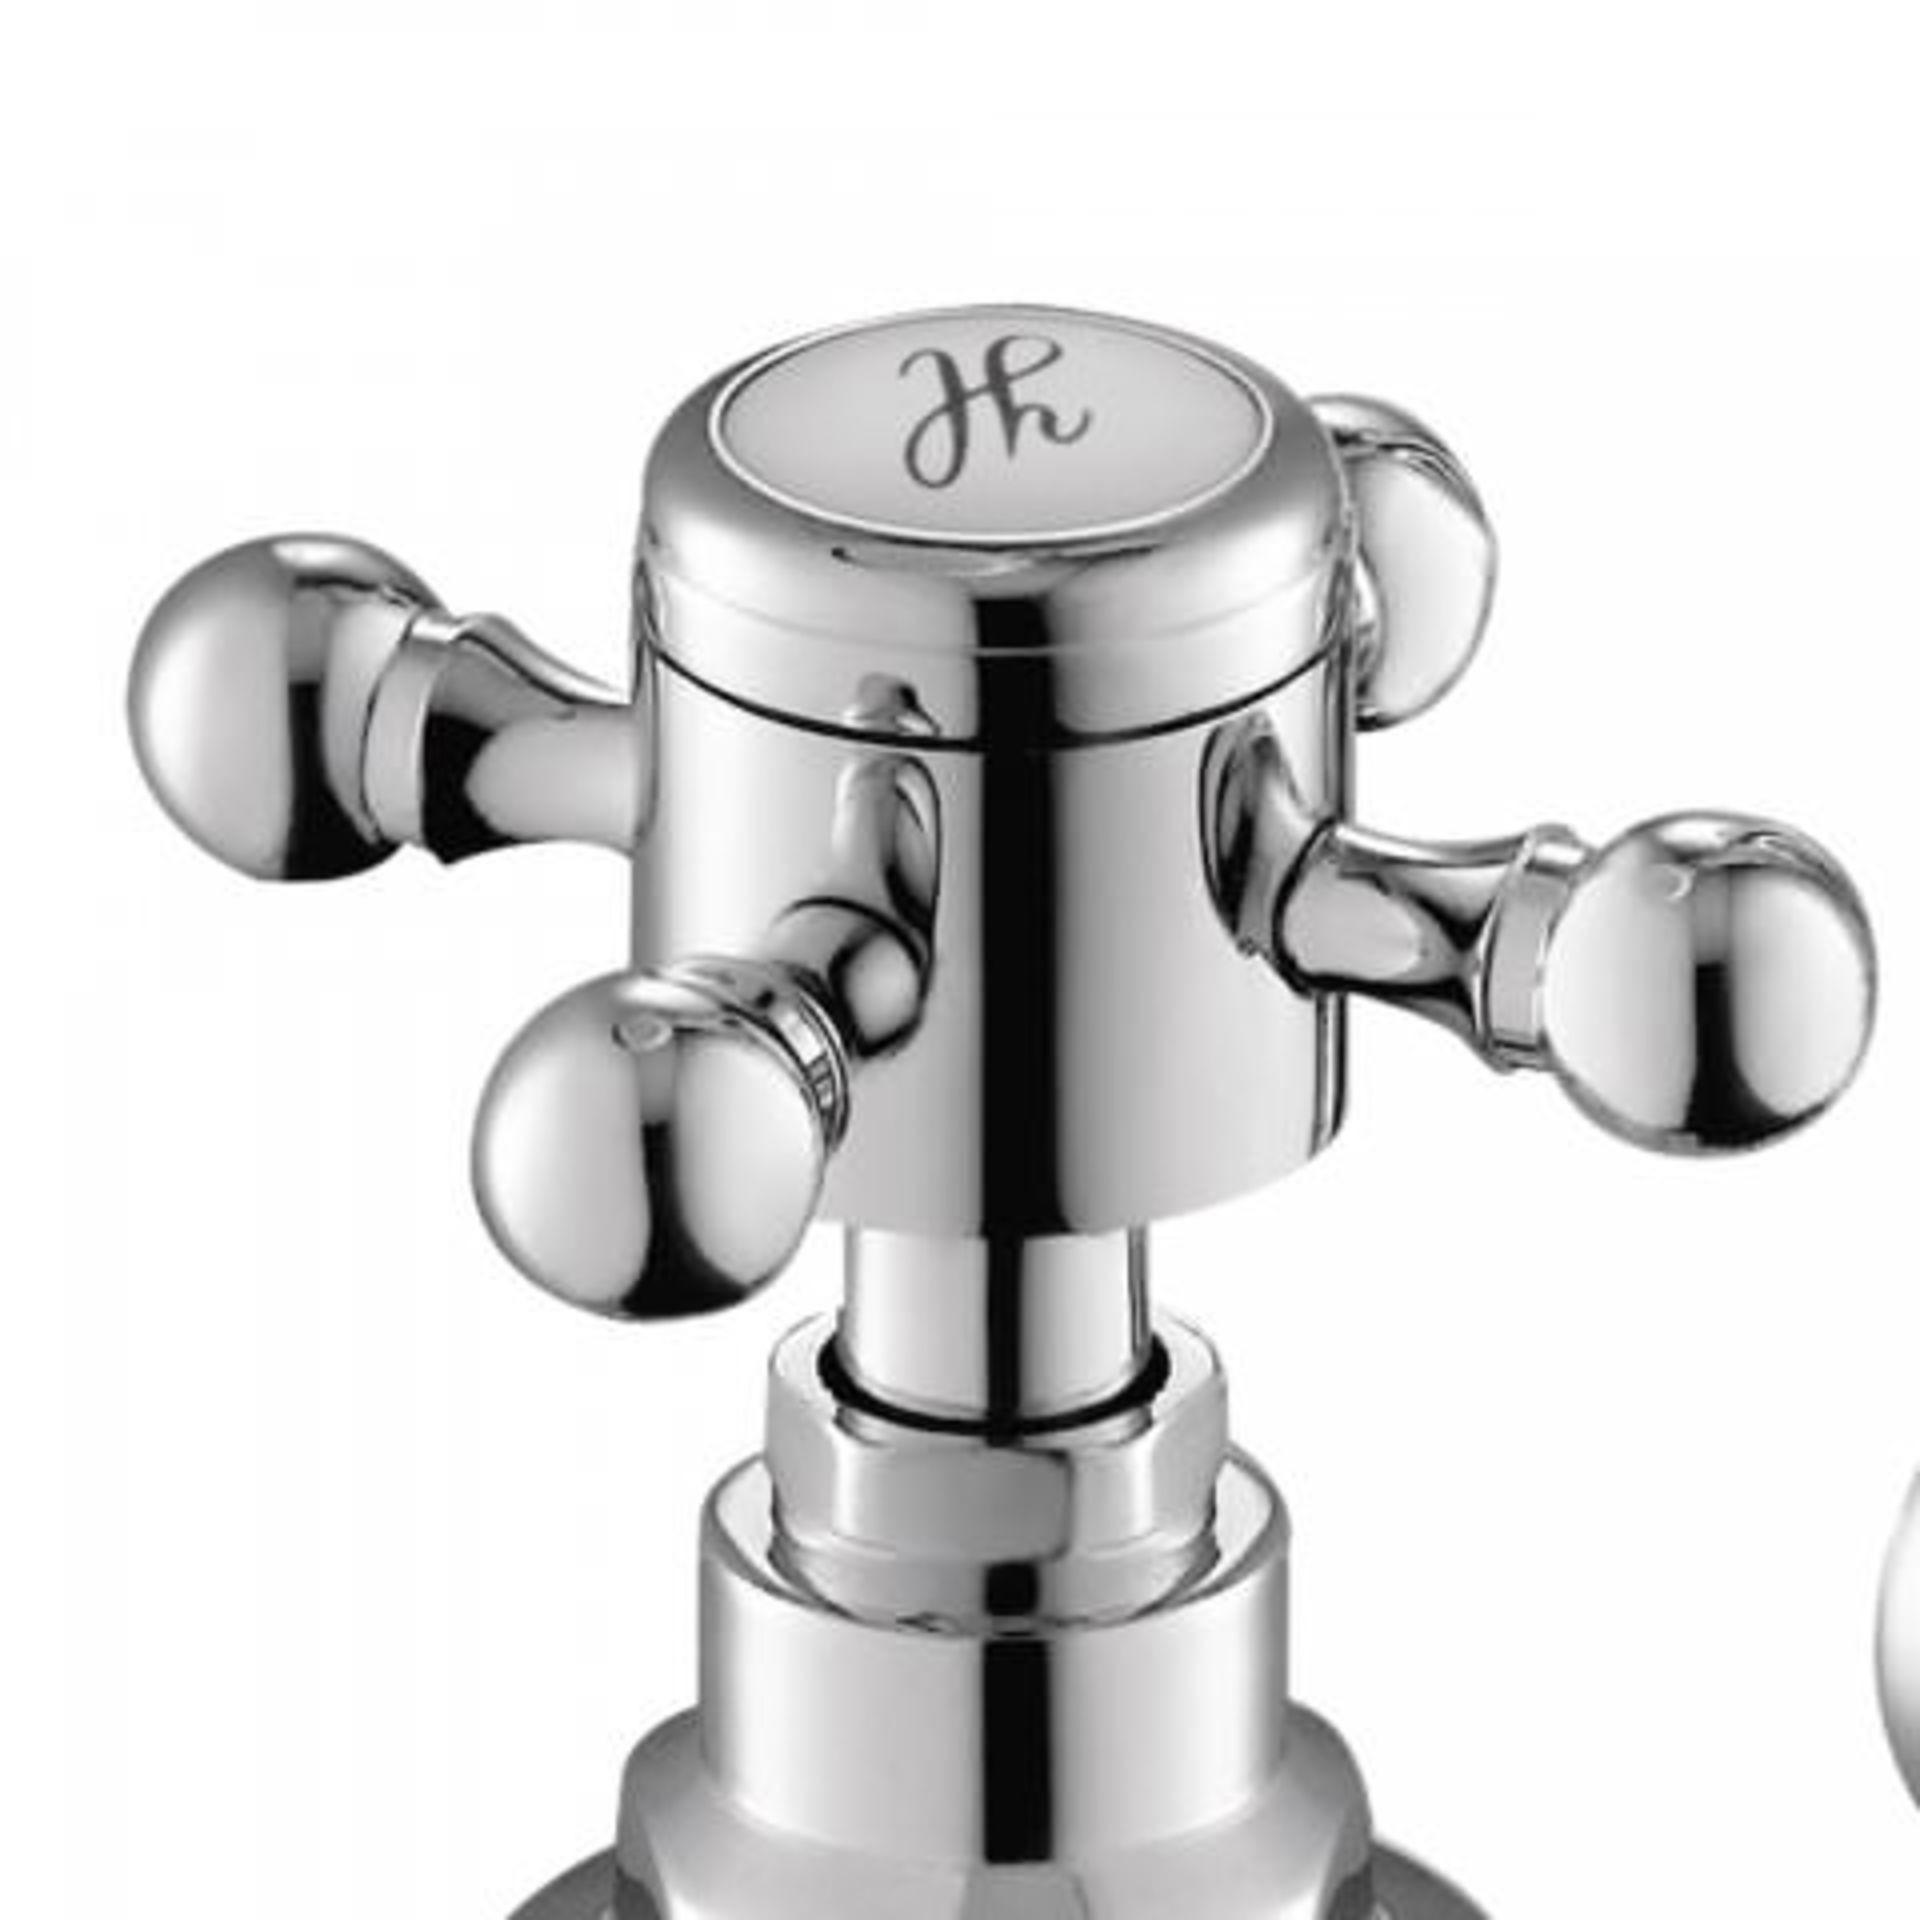 (V85) Victoria II Bath Shower Mixer - Traditional Tap with Hand Held Shower Our great range of - Image 4 of 4